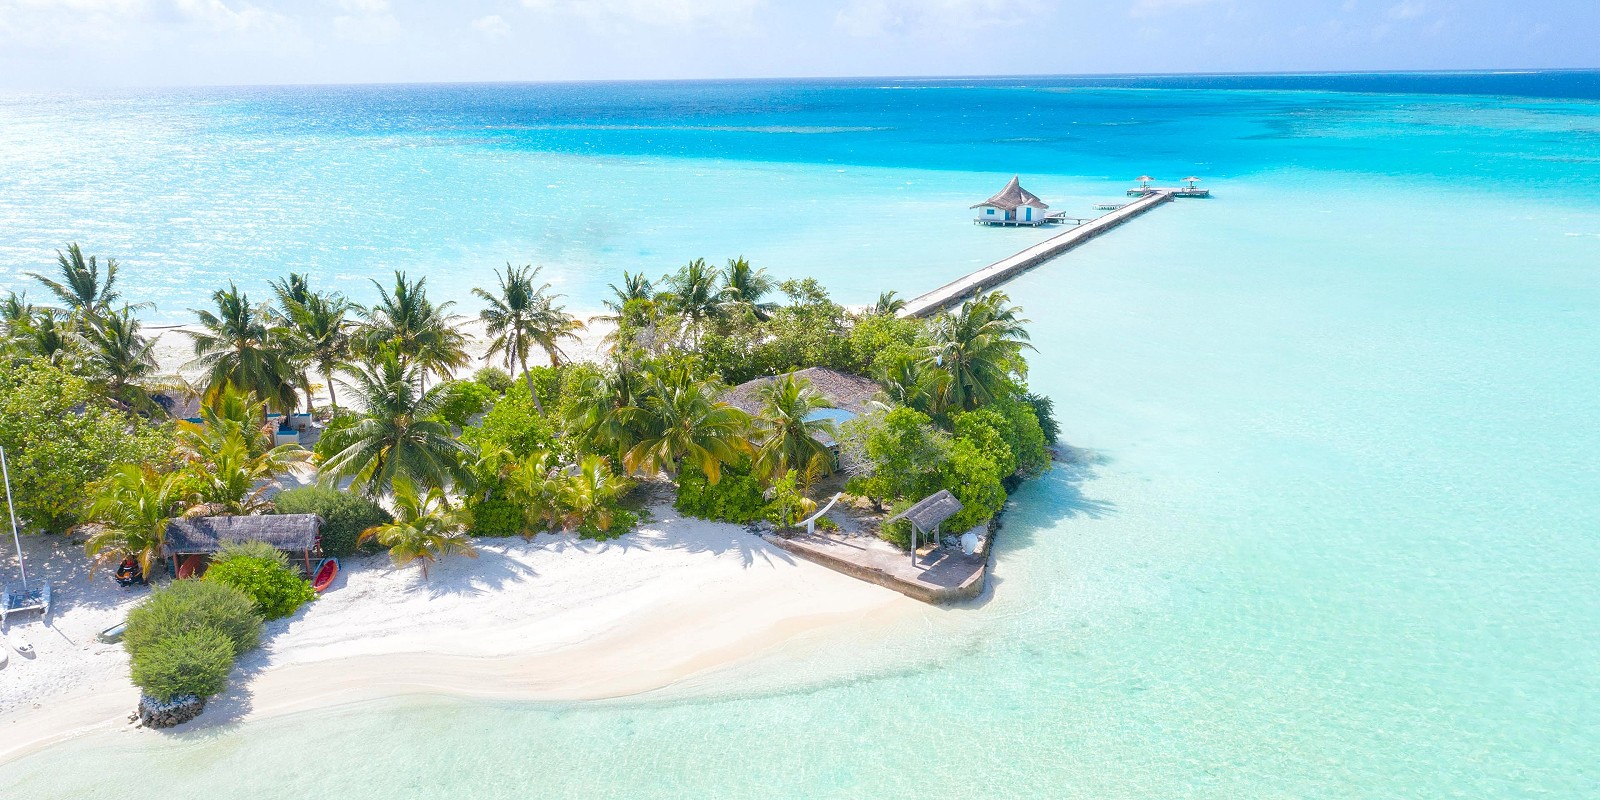 Travel blog: How To Get A Private Island Experience In The Maldives For Under £2K